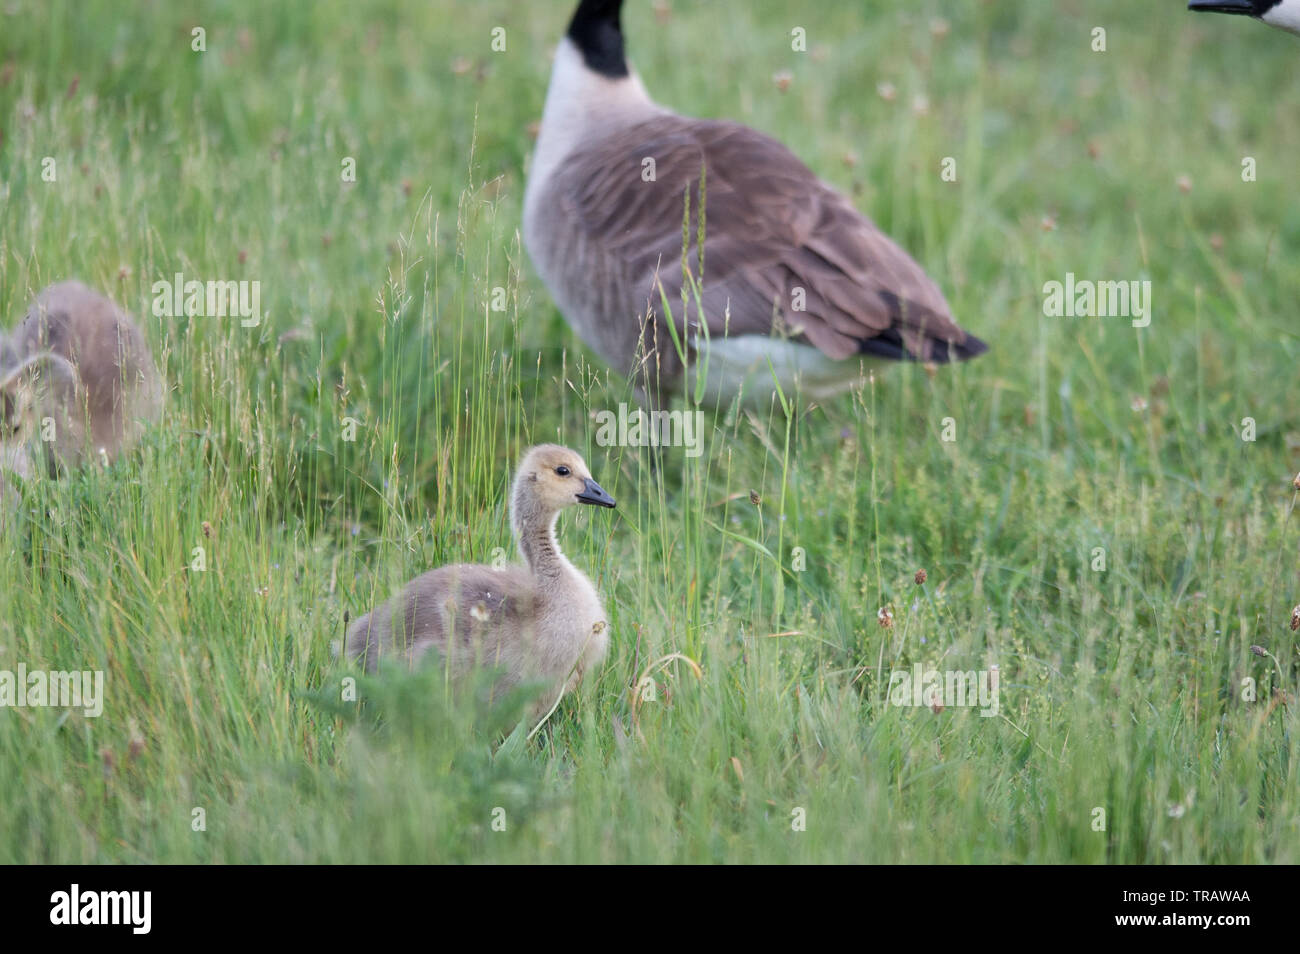 Geese in Panshangar Park. Panshanger Park is a 1000 acre site situated between  the towns Welwyn Garden City and Hertford. Stock Photo